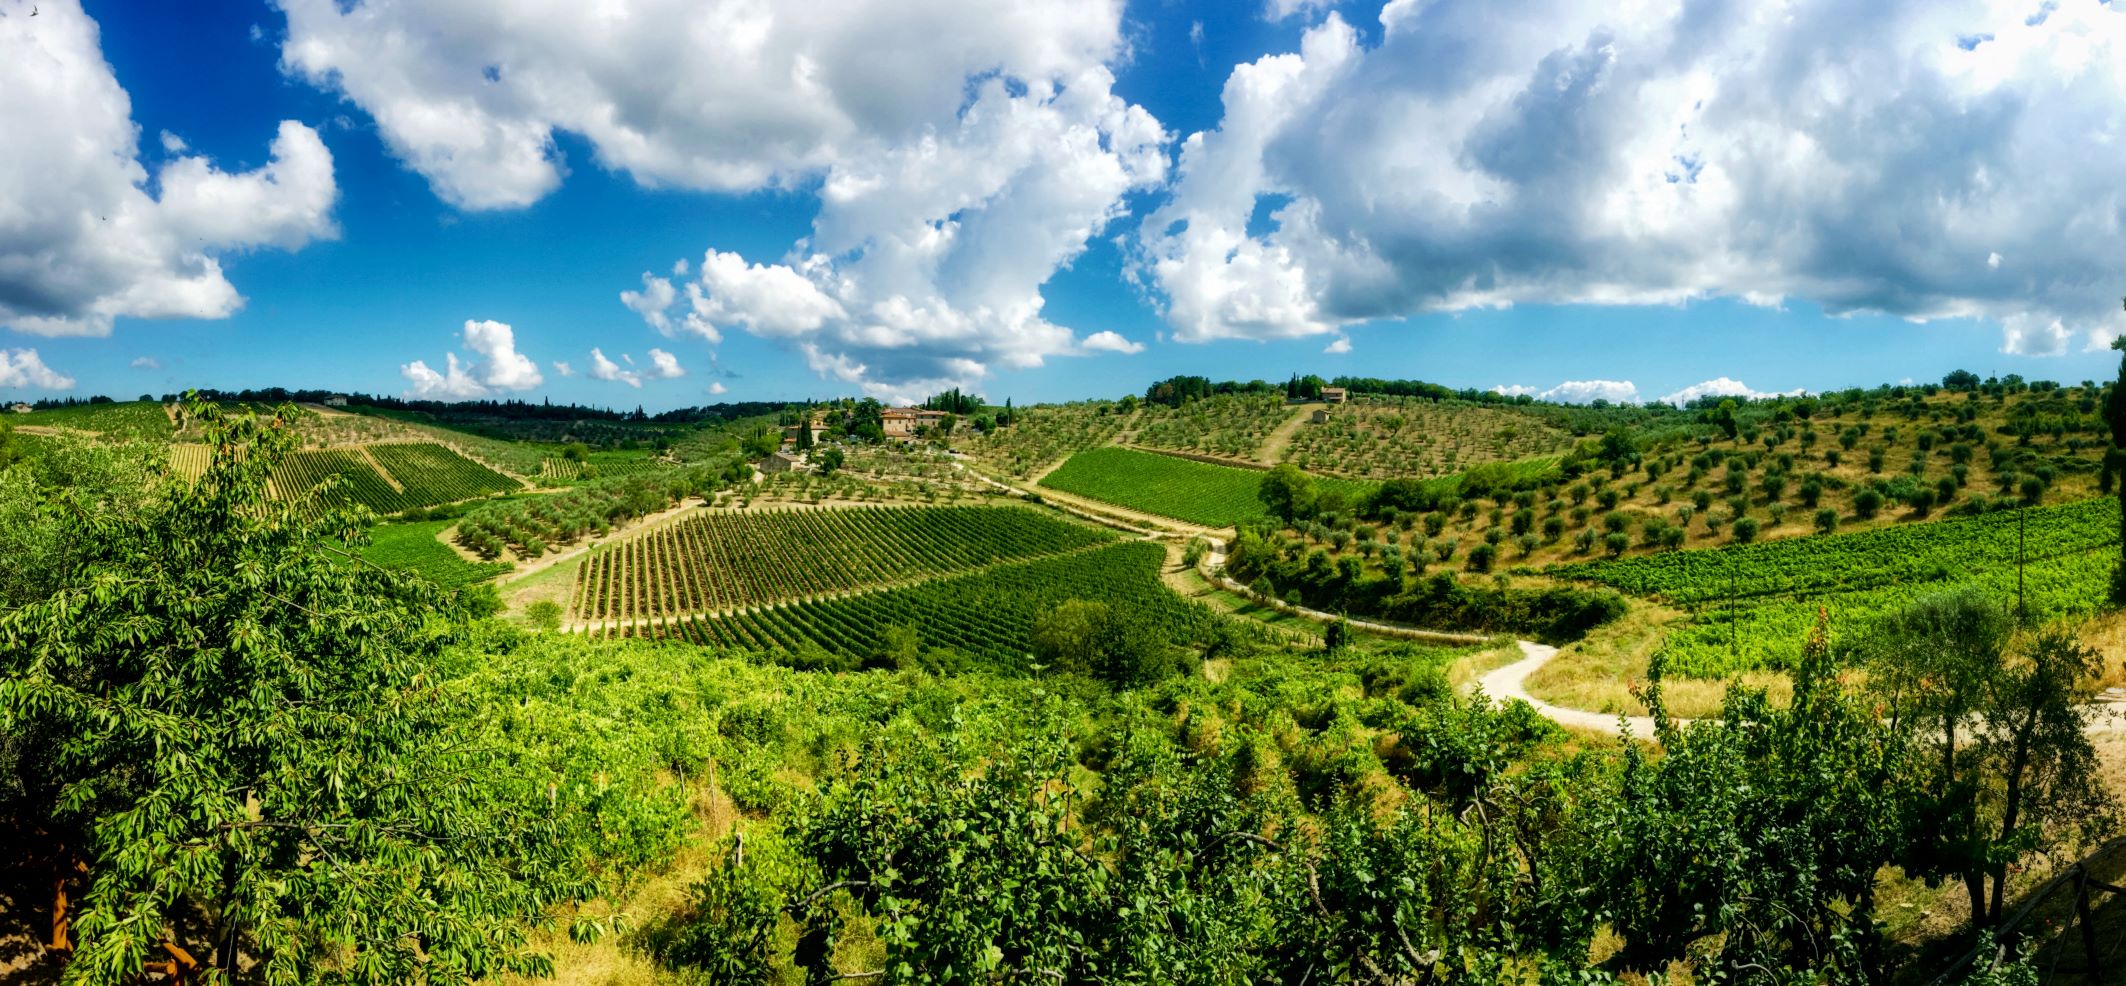 Tuscany's vineyards are full and green and begging to be explored.